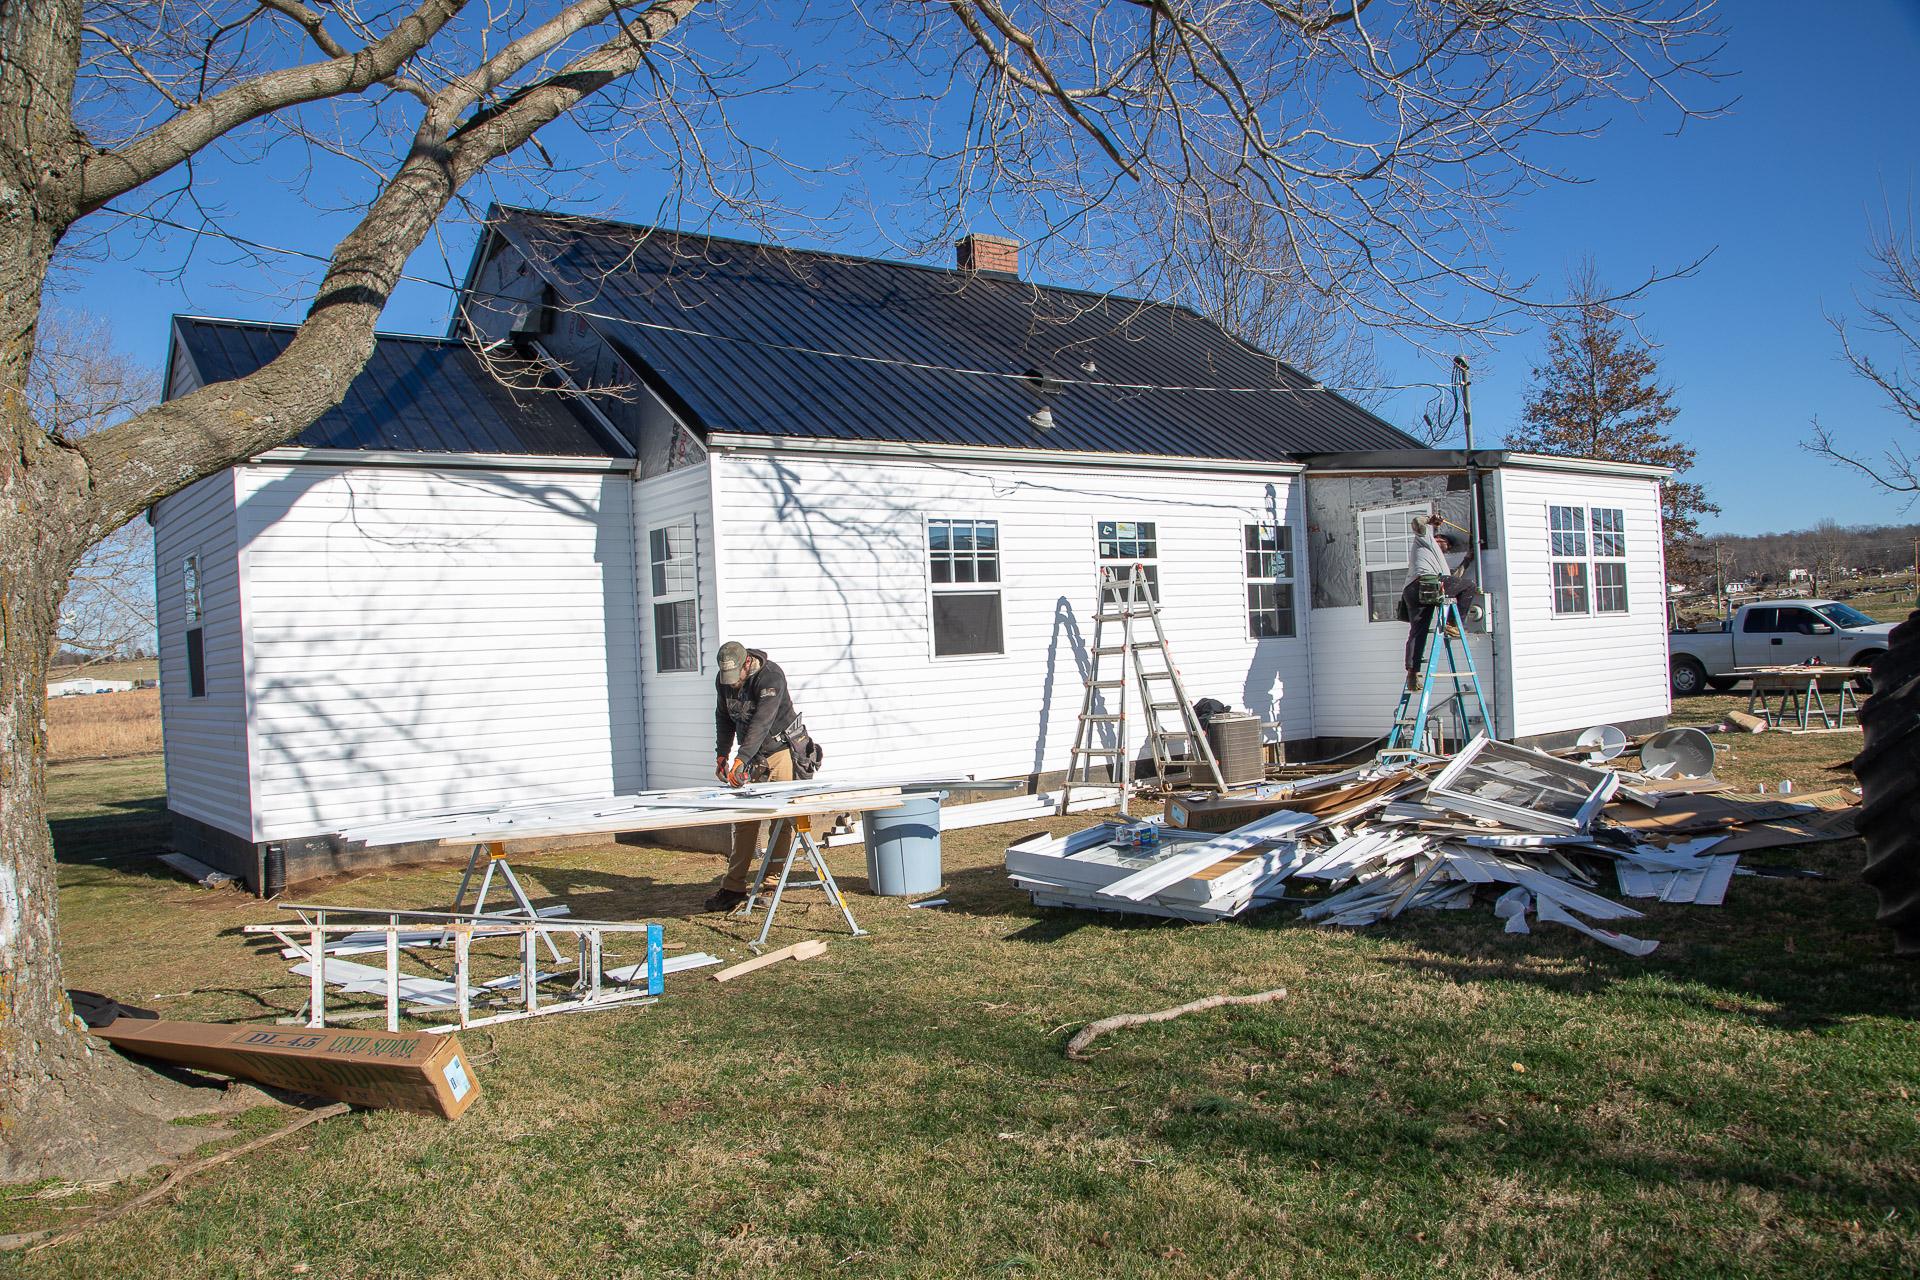 The farm operator's house at the UKREC continues to undergo renovations. Members of UK's Physical Plant Division worked on the home the end of December to help make sure the farm operator and his family were back in it by Christmas.